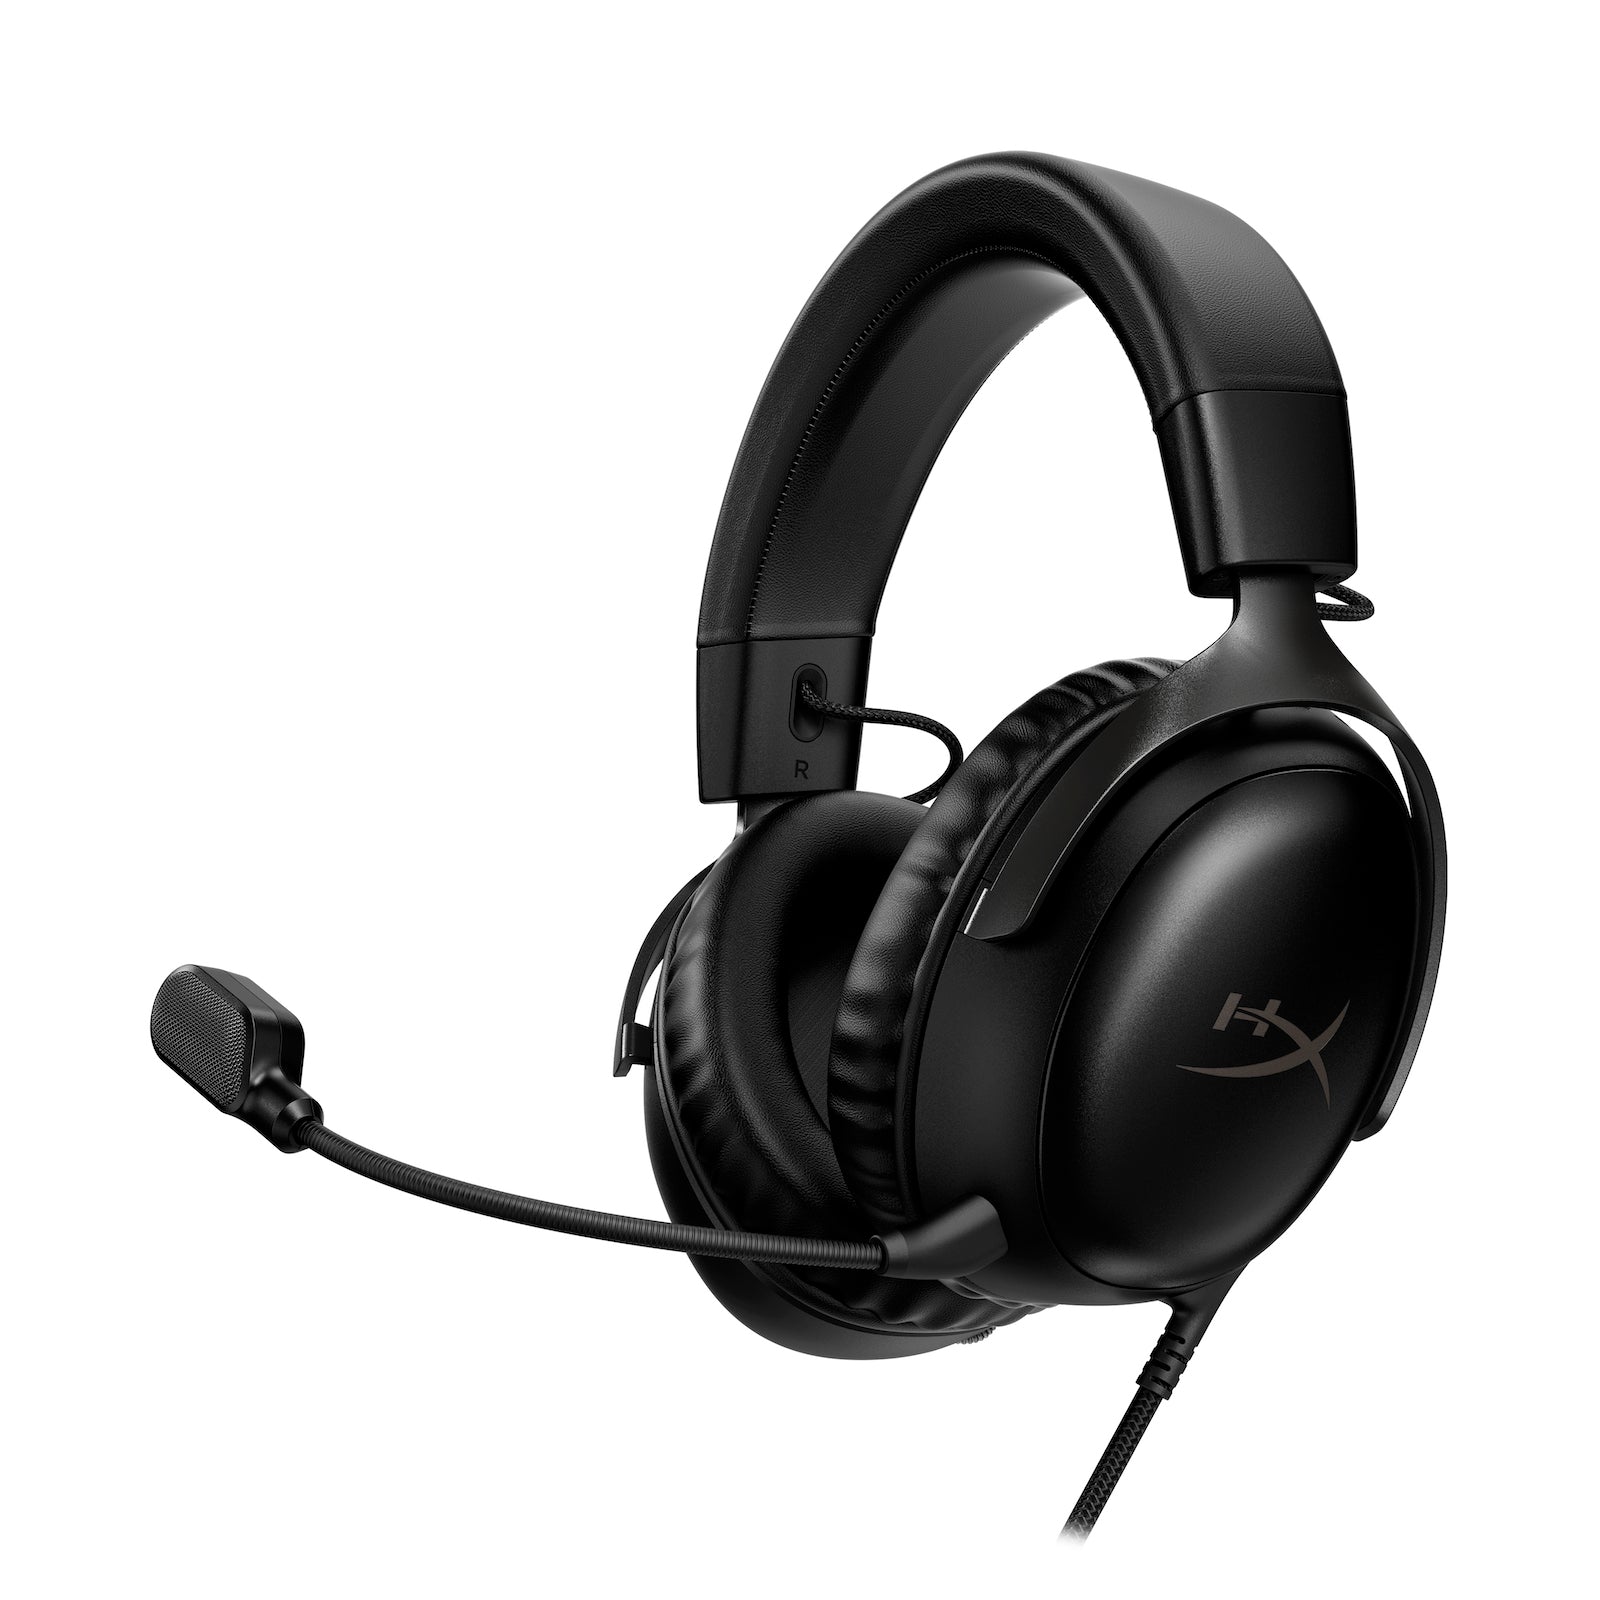 I love the HyperX Cloud Alpha gaming headset and right now it's at a  ridiculously low price